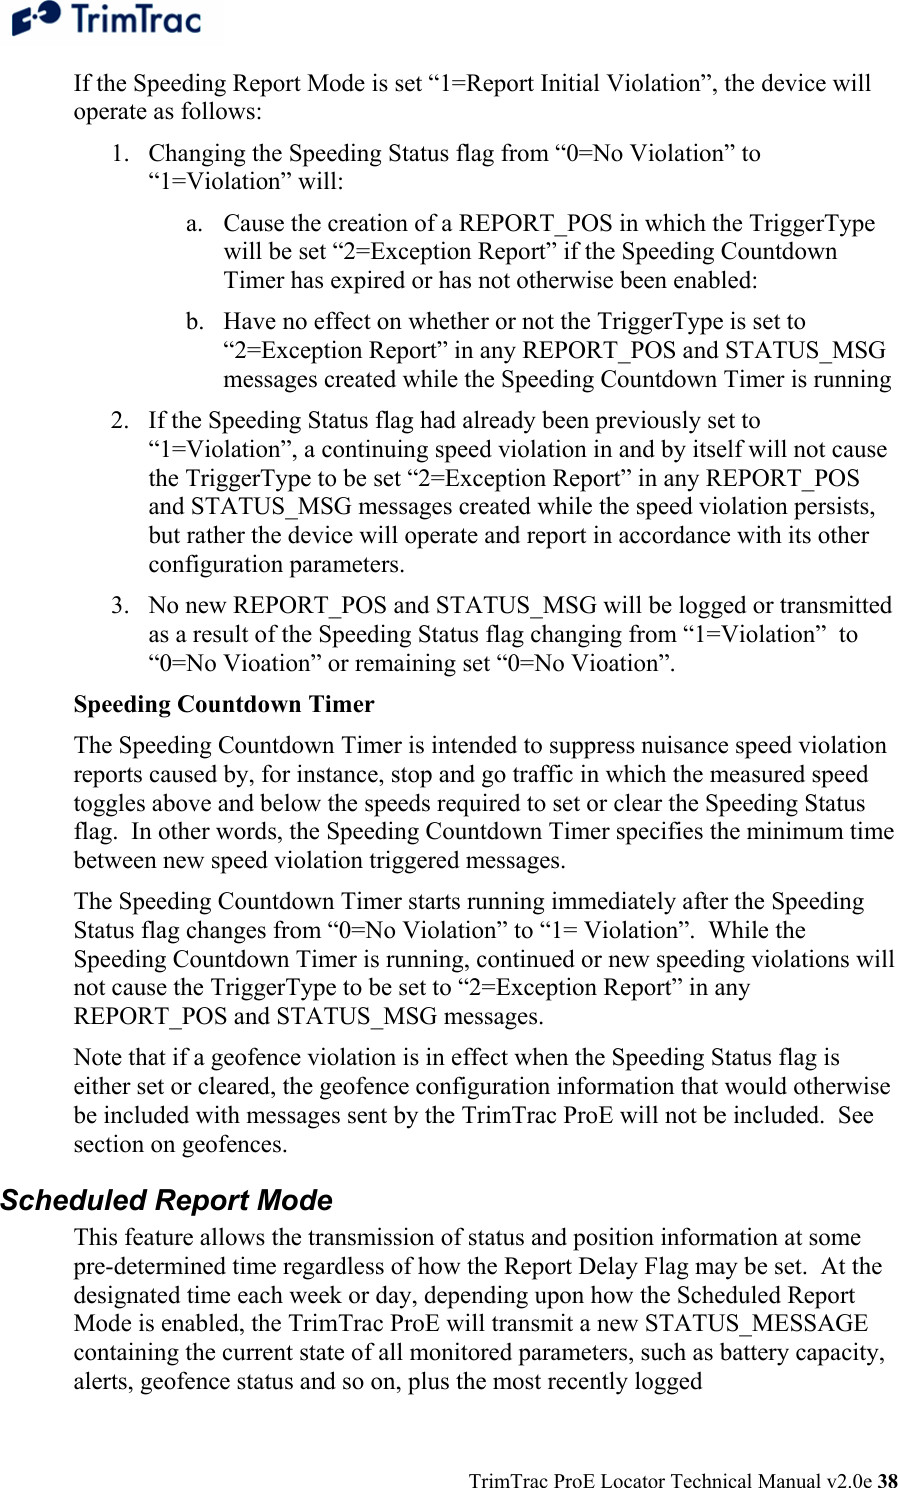  TrimTrac ProE Locator Technical Manual v2.0e 38 If the Speeding Report Mode is set “1=Report Initial Violation”, the device will operate as follows: 1. Changing the Speeding Status flag from “0=No Violation” to “1=Violation” will:  a. Cause the creation of a REPORT_POS in which the TriggerType will be set “2=Exception Report” if the Speeding Countdown Timer has expired or has not otherwise been enabled: b. Have no effect on whether or not the TriggerType is set to “2=Exception Report” in any REPORT_POS and STATUS_MSG messages created while the Speeding Countdown Timer is running 2. If the Speeding Status flag had already been previously set to “1=Violation”, a continuing speed violation in and by itself will not cause the TriggerType to be set “2=Exception Report” in any REPORT_POS and STATUS_MSG messages created while the speed violation persists, but rather the device will operate and report in accordance with its other configuration parameters. 3. No new REPORT_POS and STATUS_MSG will be logged or transmitted as a result of the Speeding Status flag changing from “1=Violation”  to “0=No Vioation” or remaining set “0=No Vioation”. Speeding Countdown Timer The Speeding Countdown Timer is intended to suppress nuisance speed violation reports caused by, for instance, stop and go traffic in which the measured speed toggles above and below the speeds required to set or clear the Speeding Status flag.  In other words, the Speeding Countdown Timer specifies the minimum time between new speed violation triggered messages. The Speeding Countdown Timer starts running immediately after the Speeding Status flag changes from “0=No Violation” to “1= Violation”.  While the Speeding Countdown Timer is running, continued or new speeding violations will not cause the TriggerType to be set to “2=Exception Report” in any REPORT_POS and STATUS_MSG messages. Note that if a geofence violation is in effect when the Speeding Status flag is either set or cleared, the geofence configuration information that would otherwise be included with messages sent by the TrimTrac ProE will not be included.  See section on geofences. Scheduled Report Mode This feature allows the transmission of status and position information at some pre-determined time regardless of how the Report Delay Flag may be set.  At the designated time each week or day, depending upon how the Scheduled Report Mode is enabled, the TrimTrac ProE will transmit a new STATUS_MESSAGE containing the current state of all monitored parameters, such as battery capacity, alerts, geofence status and so on, plus the most recently logged 